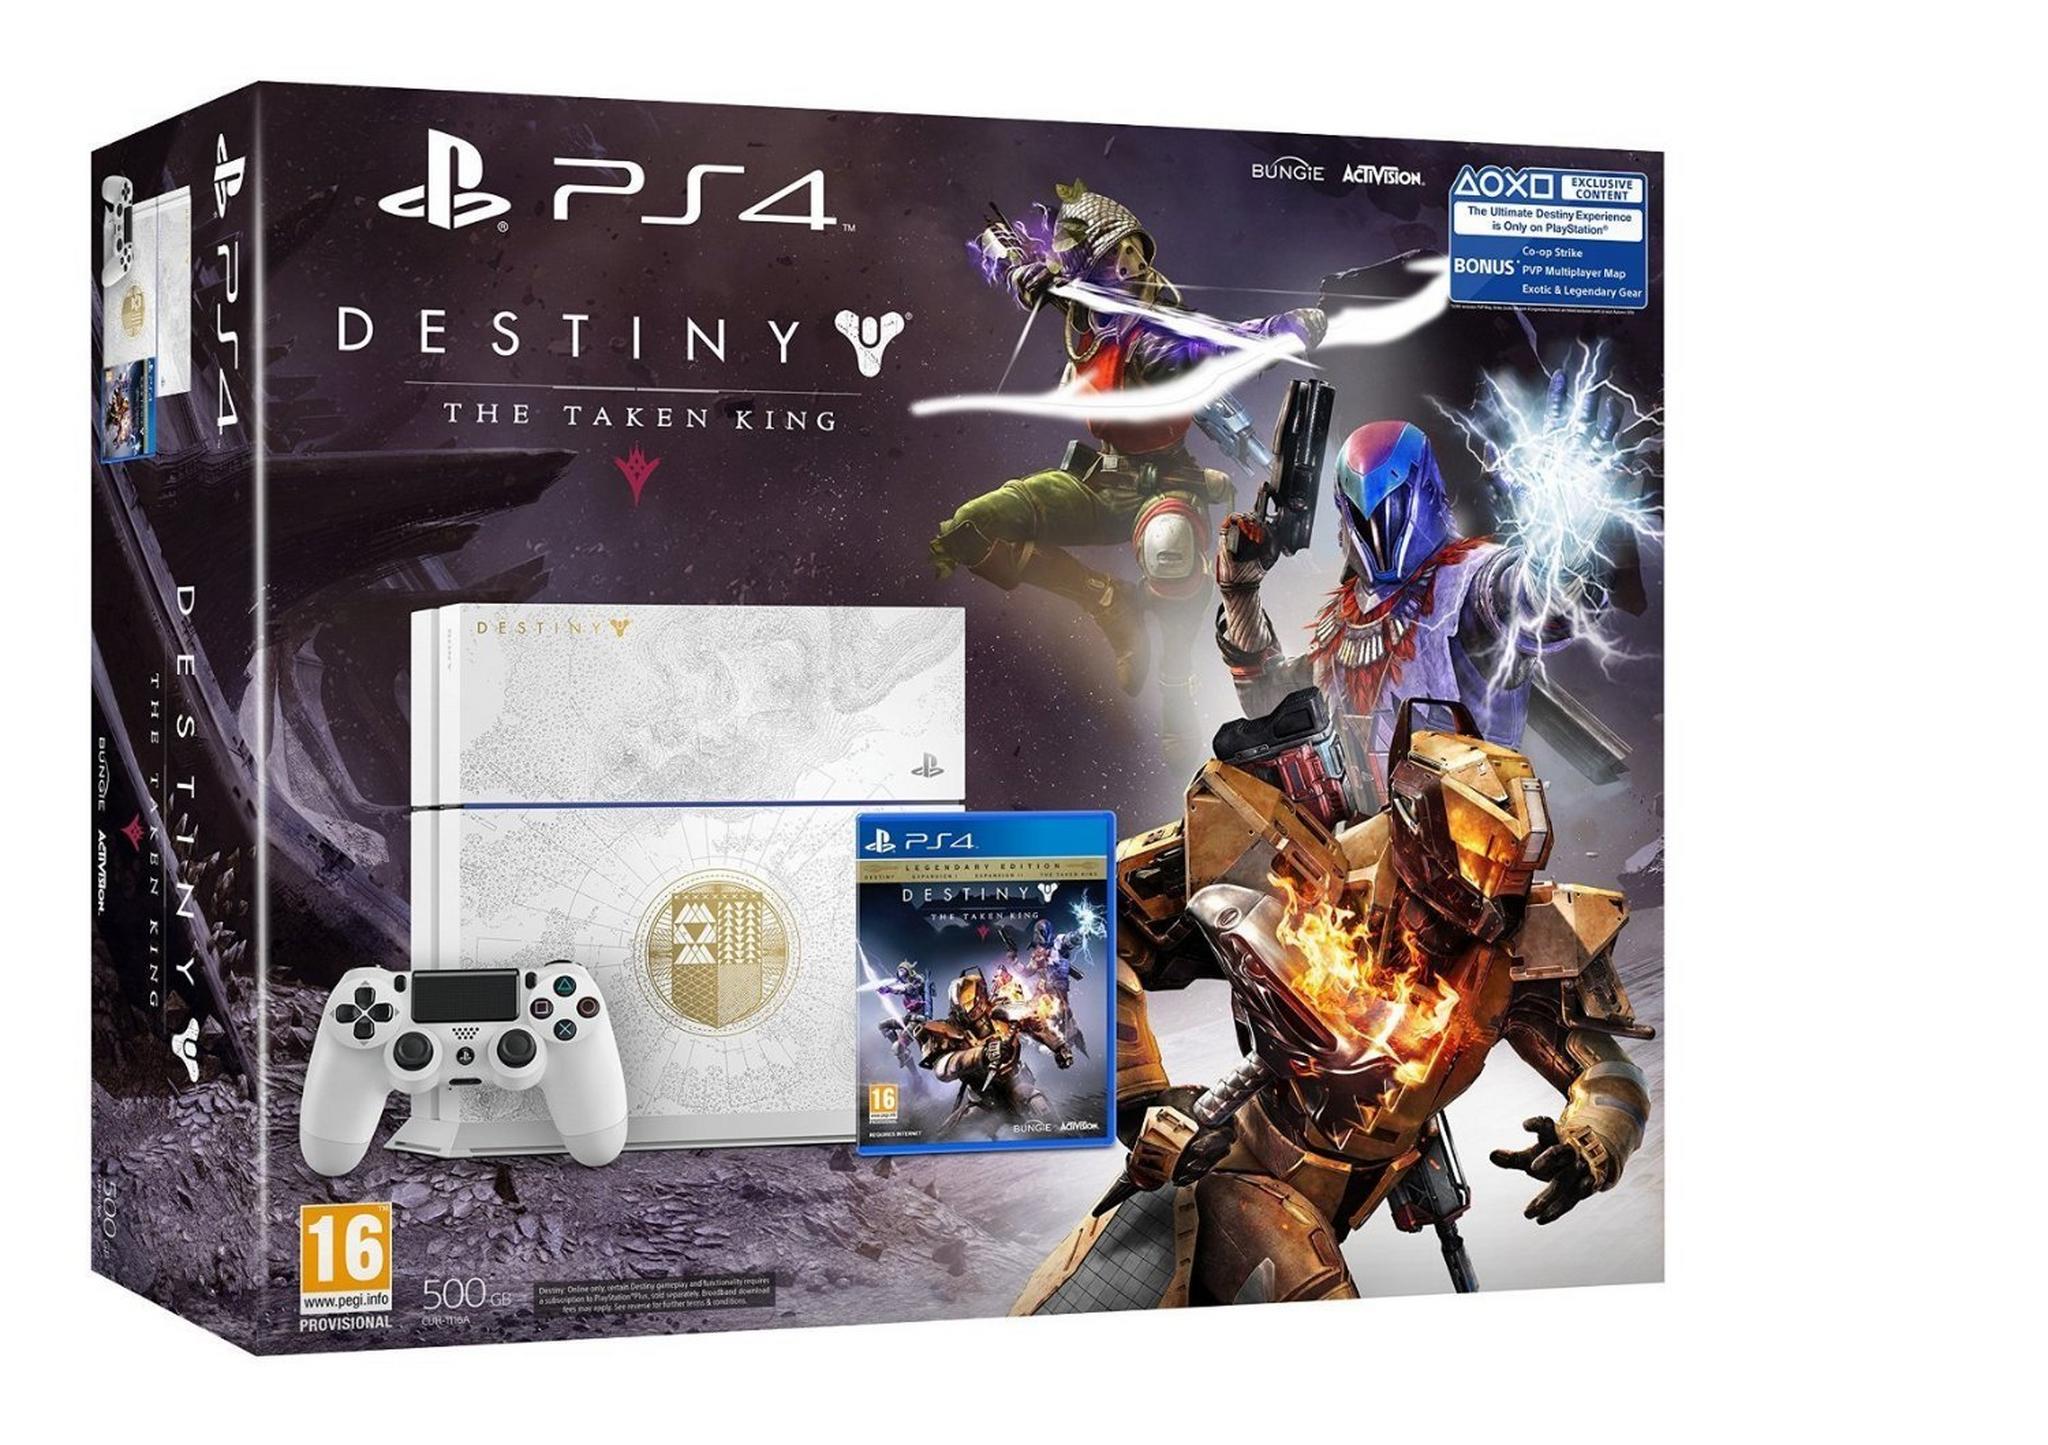 Sony PlayStation 4 500GB Limited Edition + 1 Controller + Destiny: The Taken King Game (Legendary Edition)